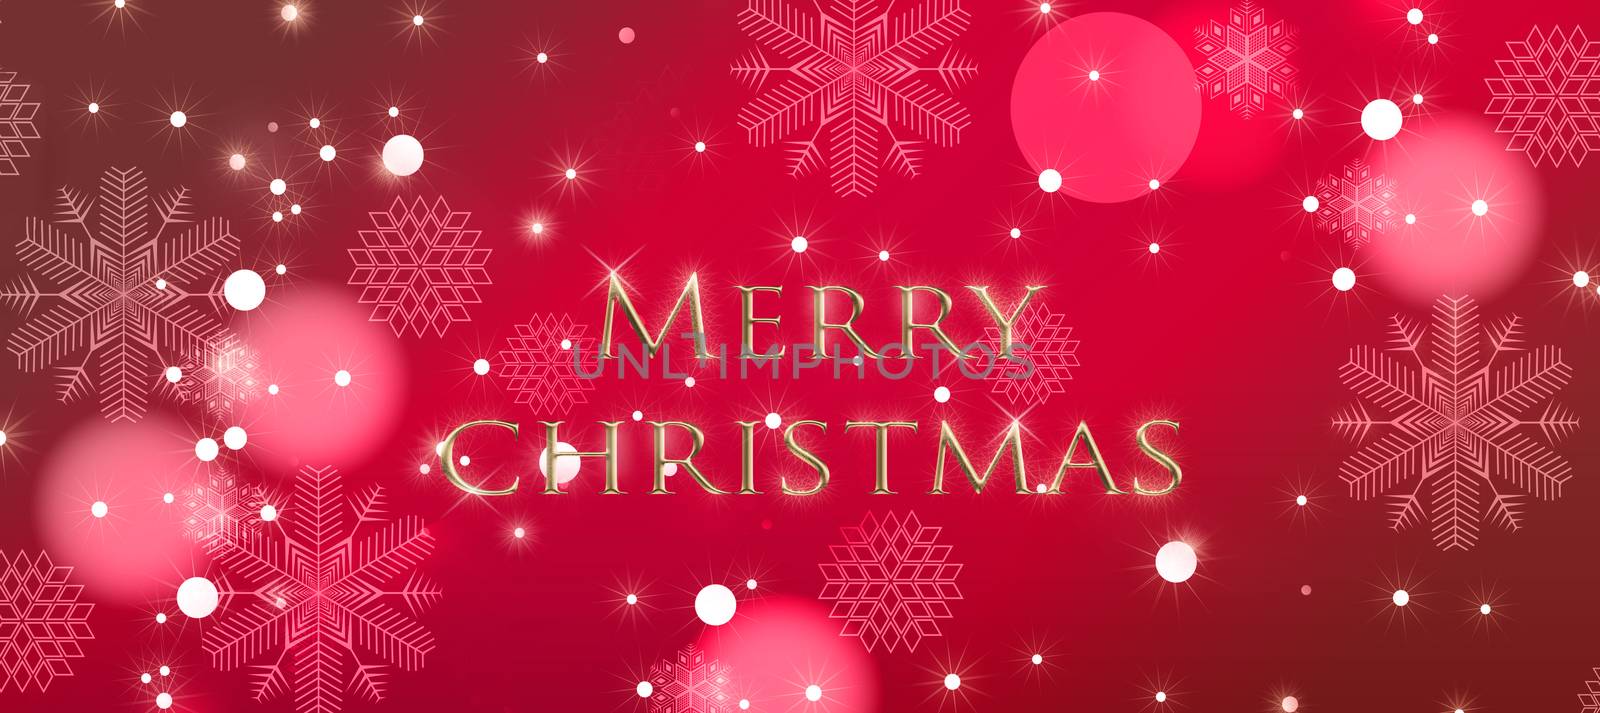 Christmas greetings, festive background for the images. by georgina198